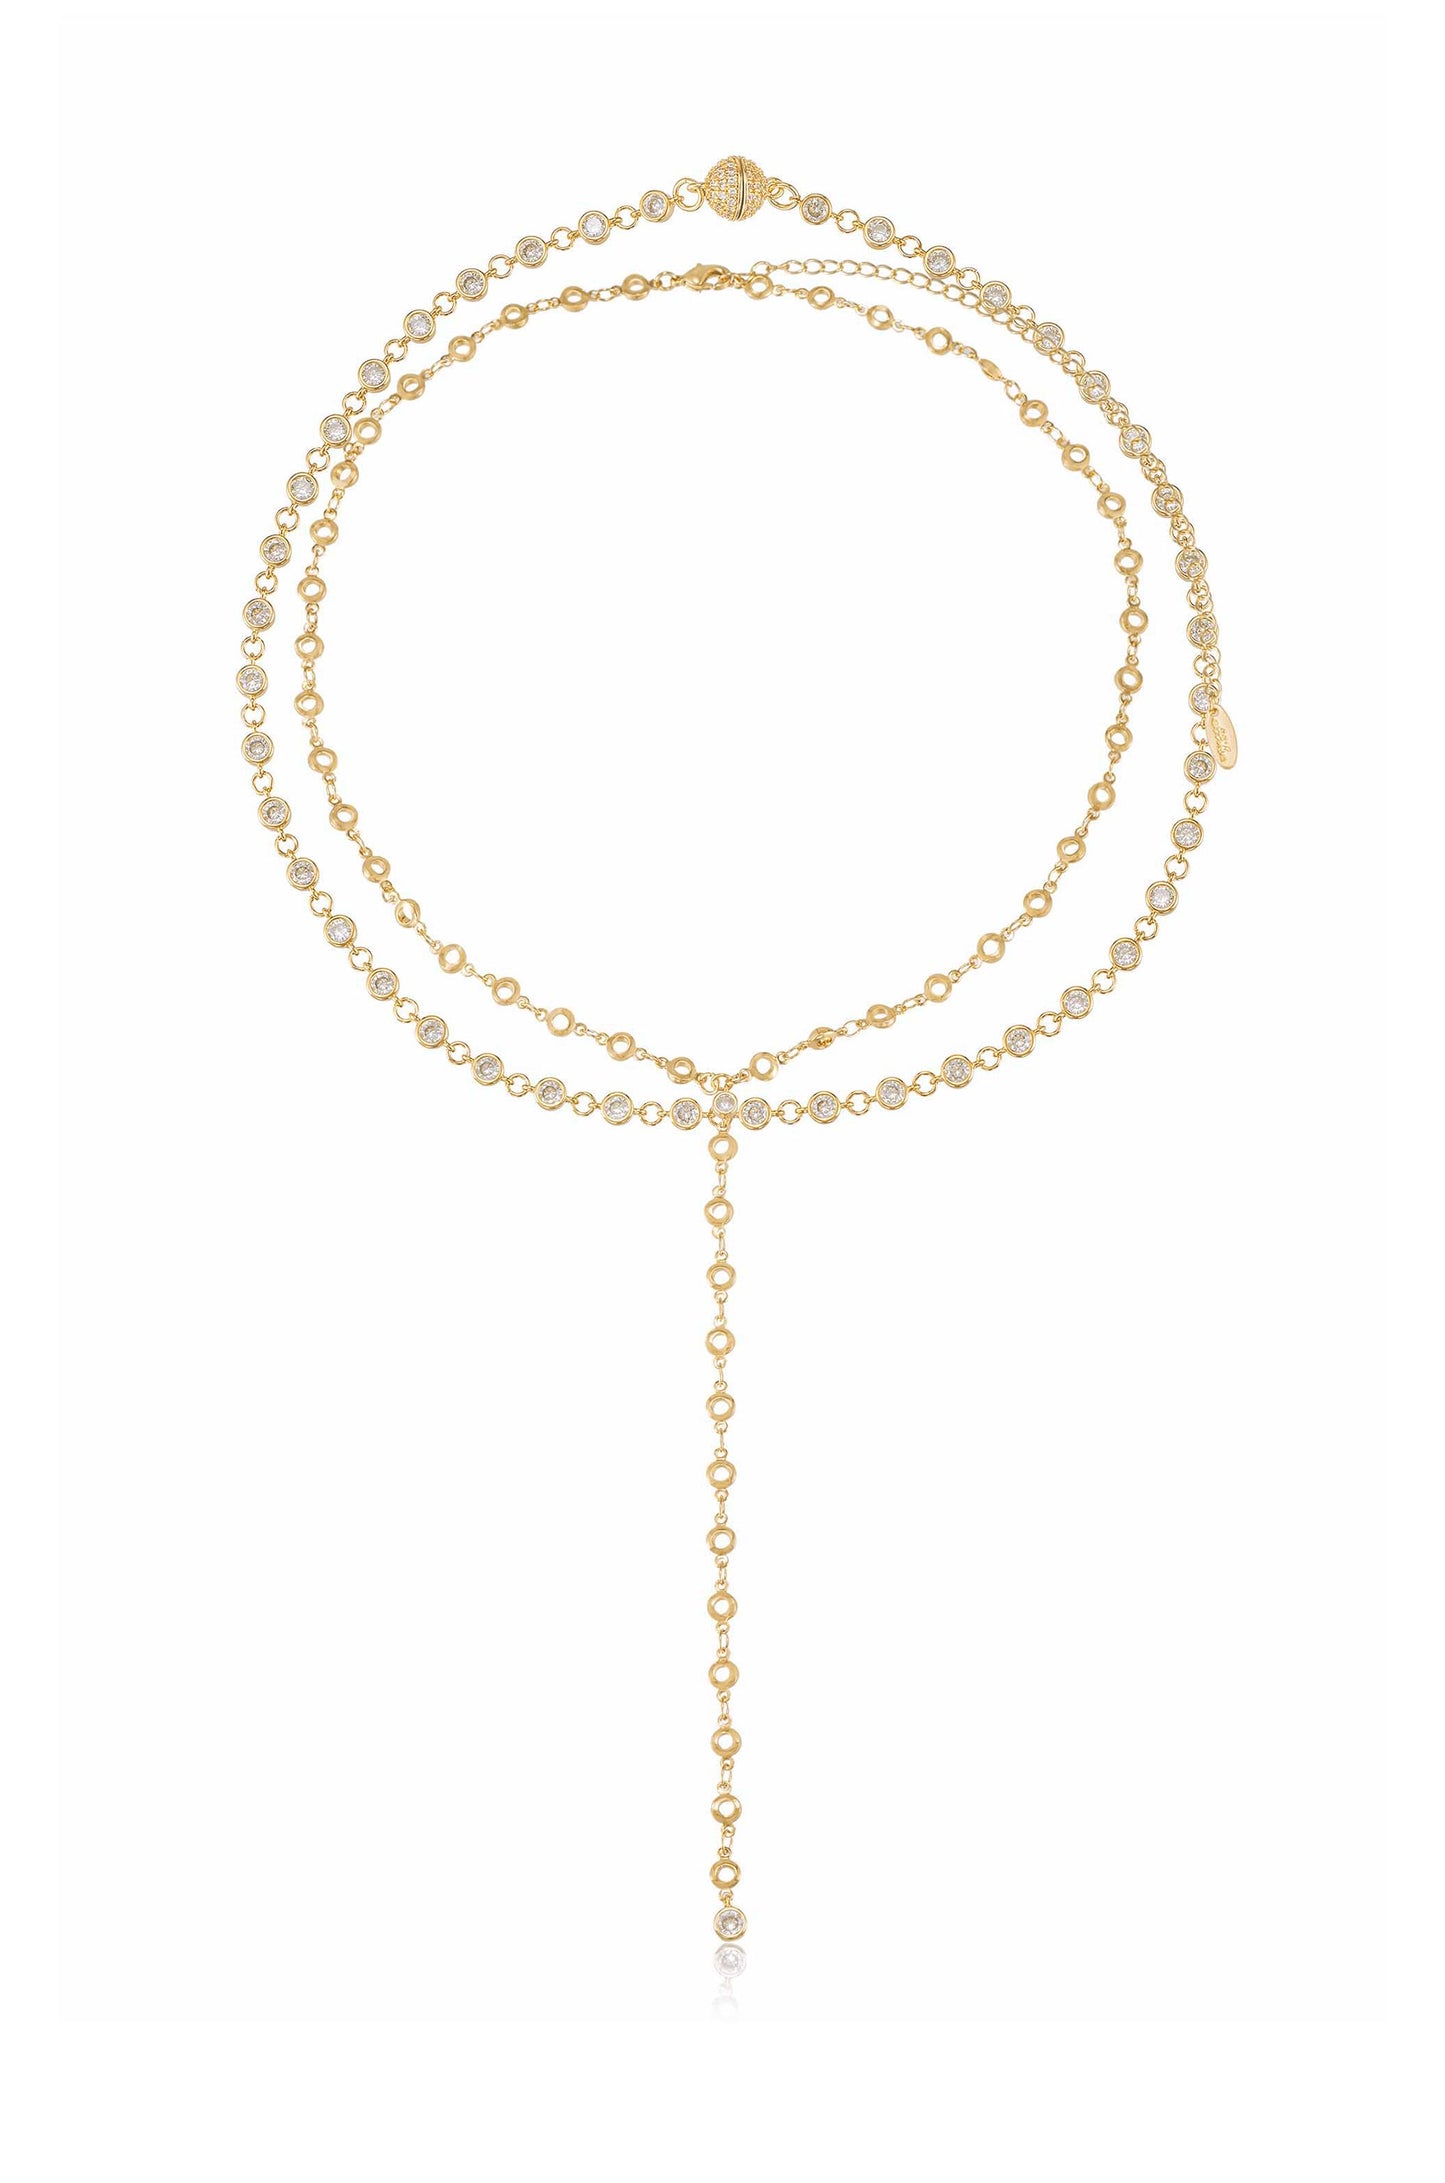 Crystal and 18k Gold Plated Chain Lariat Necklace Set full